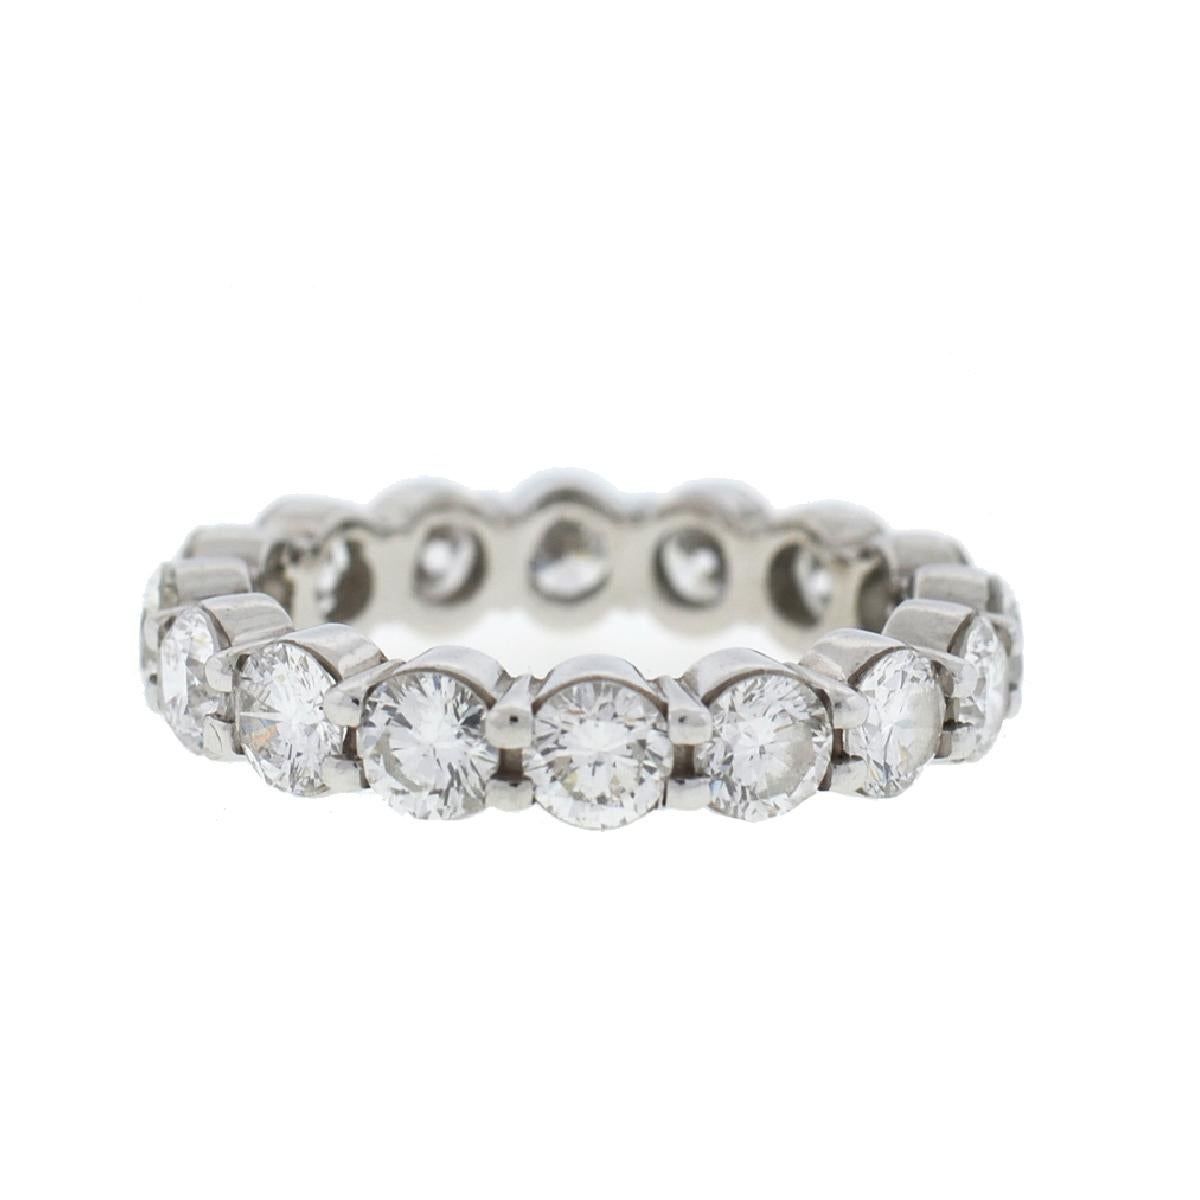 Company-N/A
Style-Diamond Eternity Band Ring 3.75Cts 
Metal-18k White Gold
Size-6.50
Weight-5.89 grams
Stones-Diamonds approx 3.75Cts tw
Sku - 9091-2TMEE